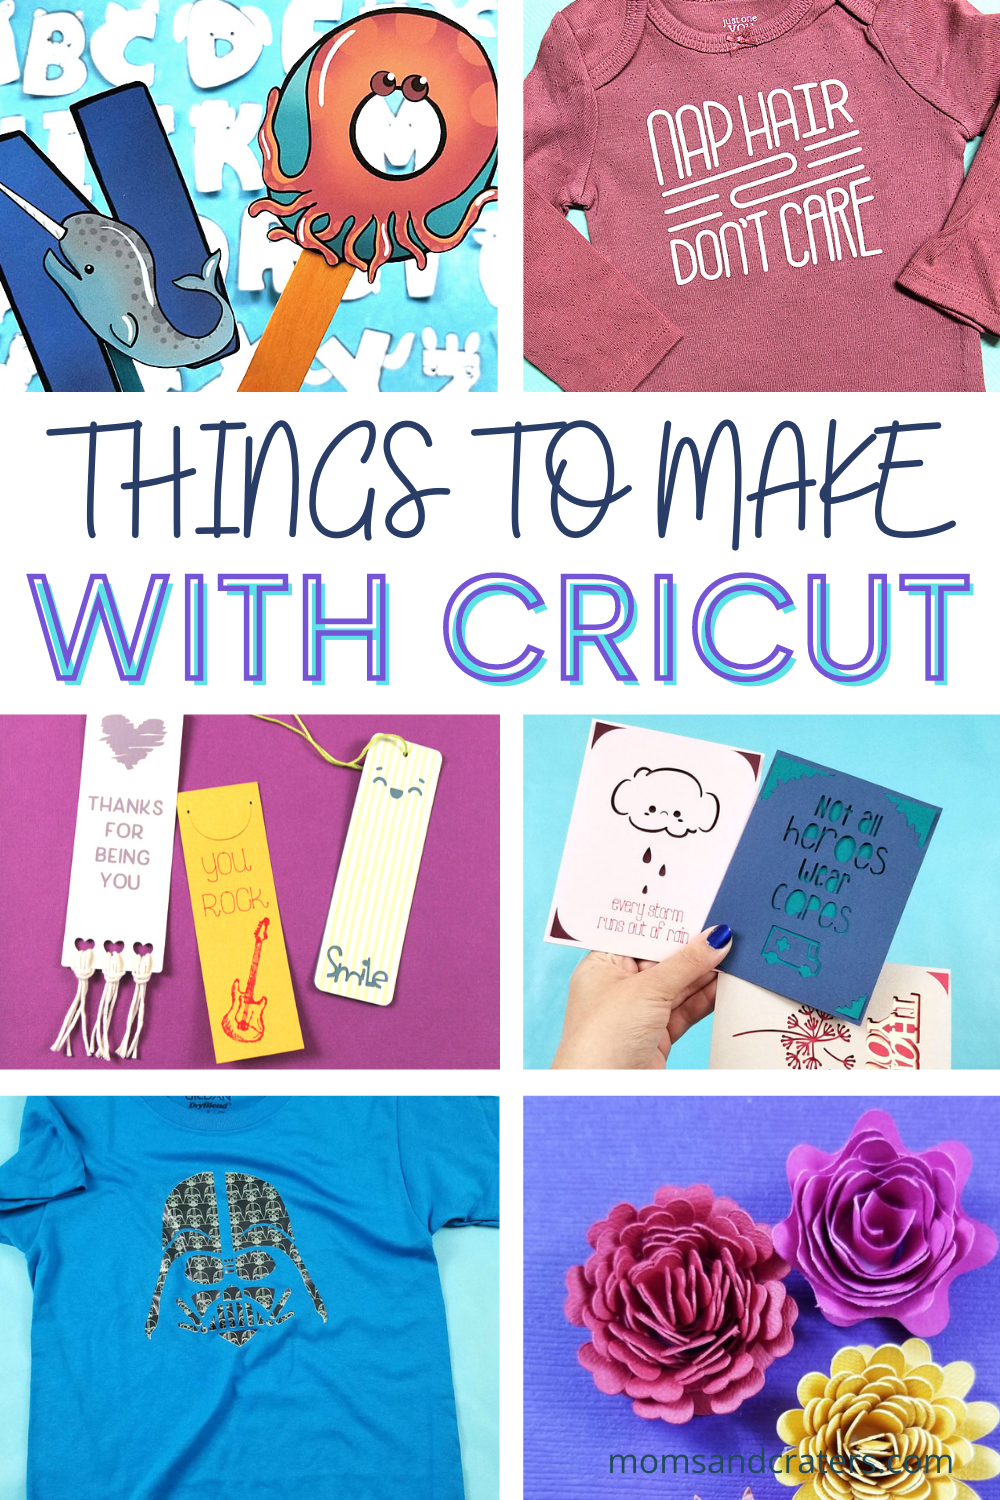 Things to Make with Cricut book cover